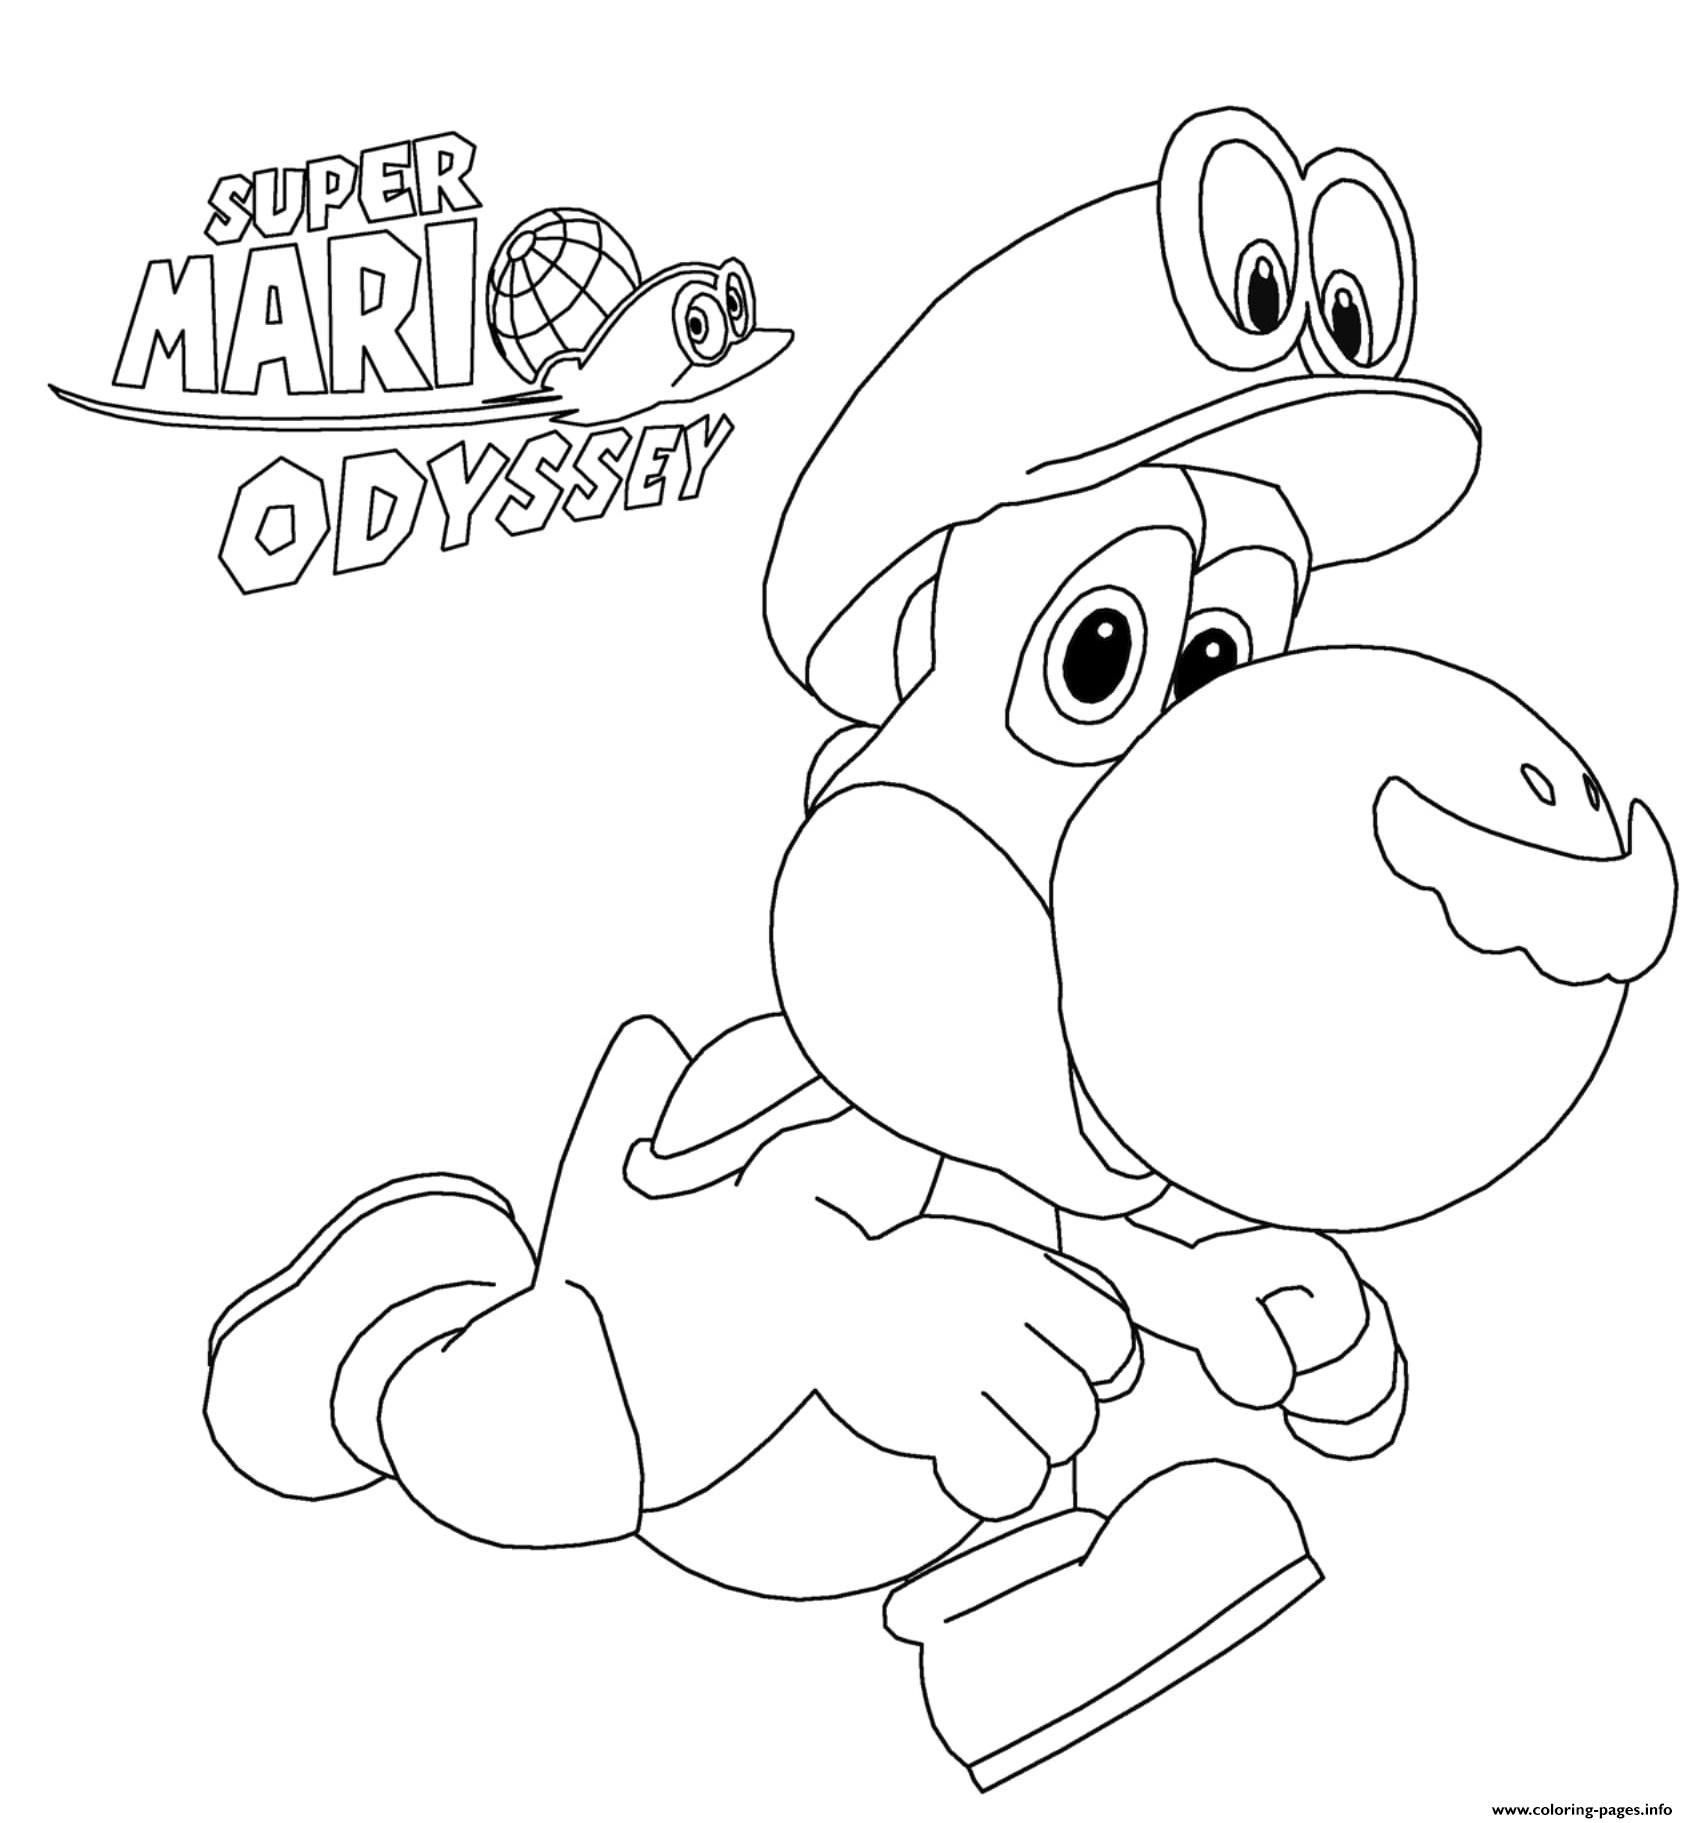 Super Mario Odyssey Coloring Pages Coloring Home 